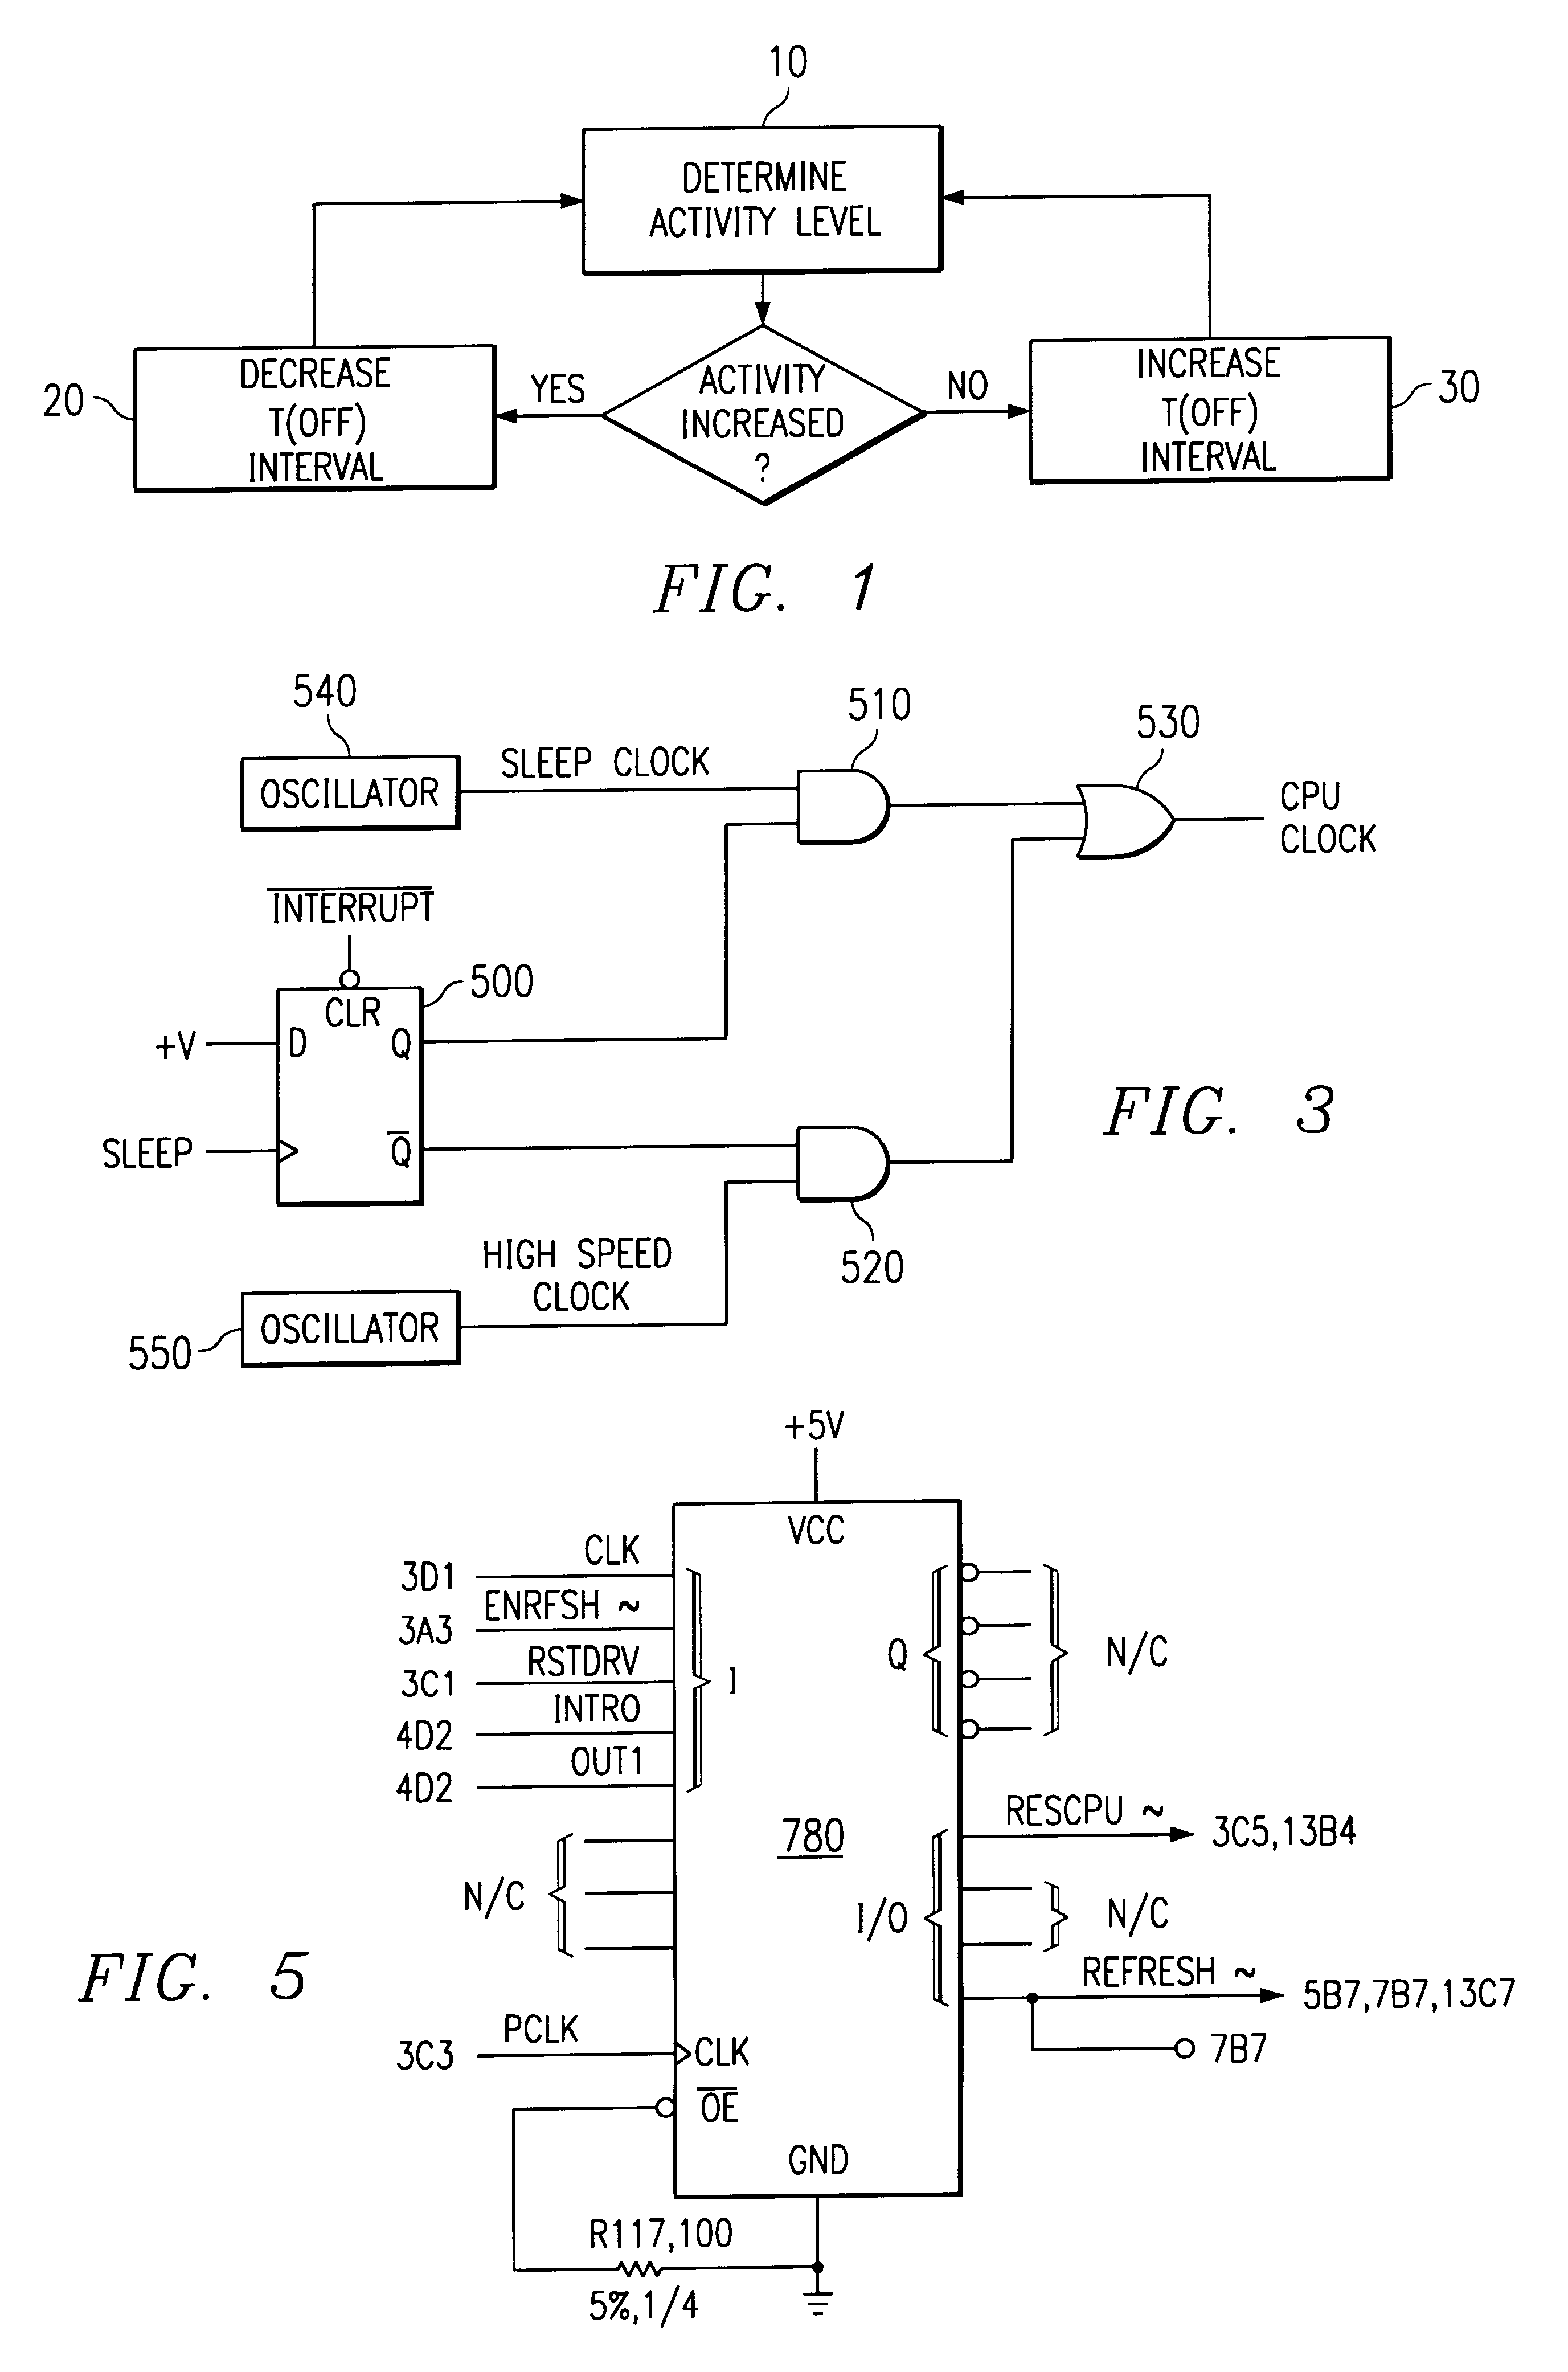 Real-time power conservation for electronic device having a processor